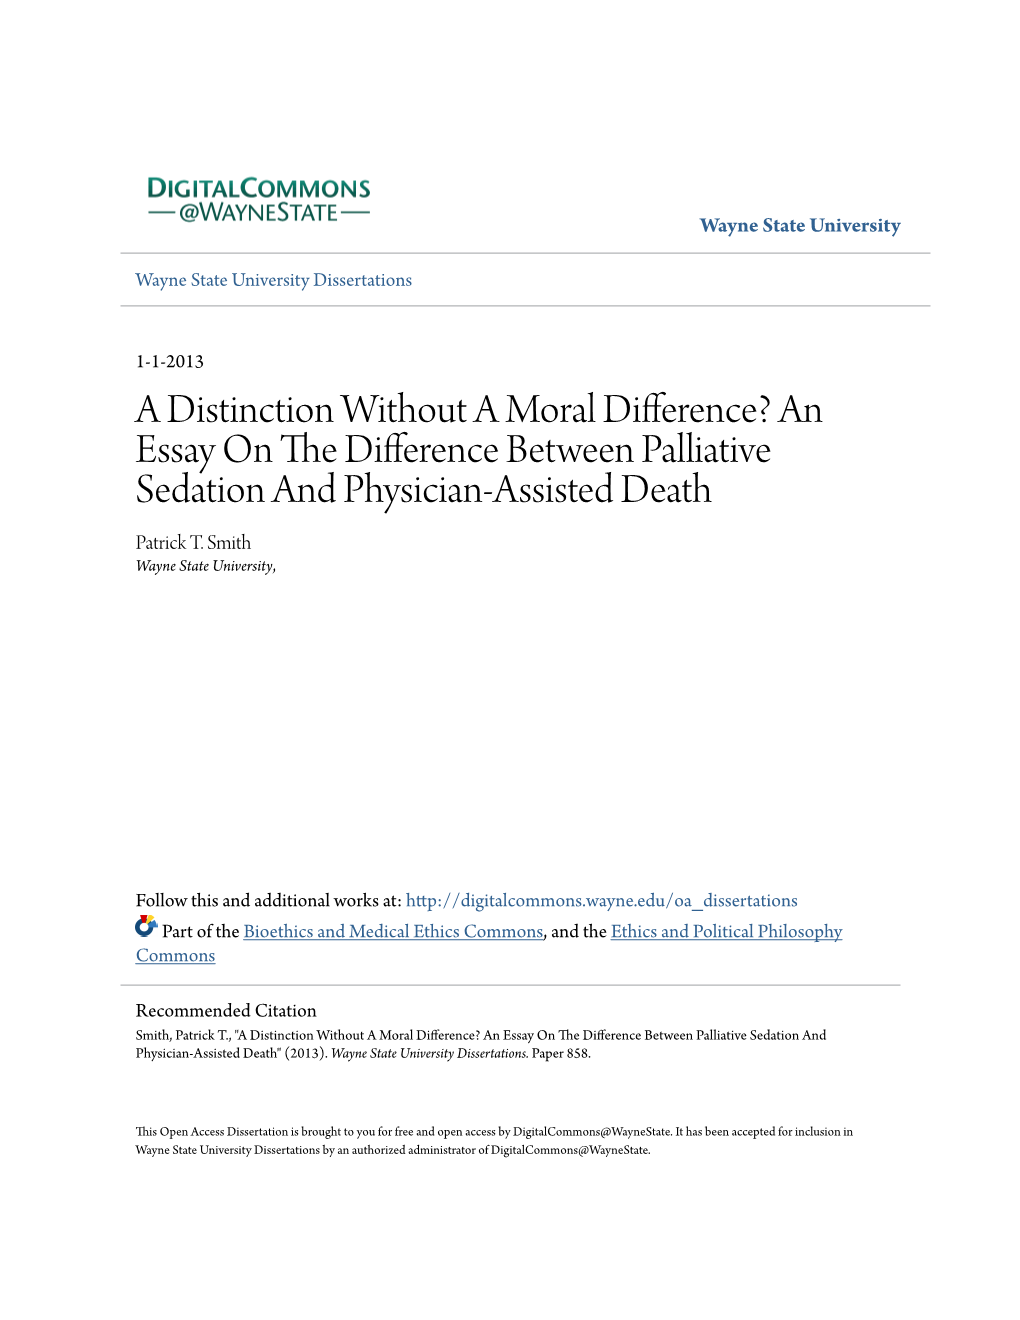 An Essay on the Difference Between Palliative Sedation and Physician-Assisted Death Patrick T